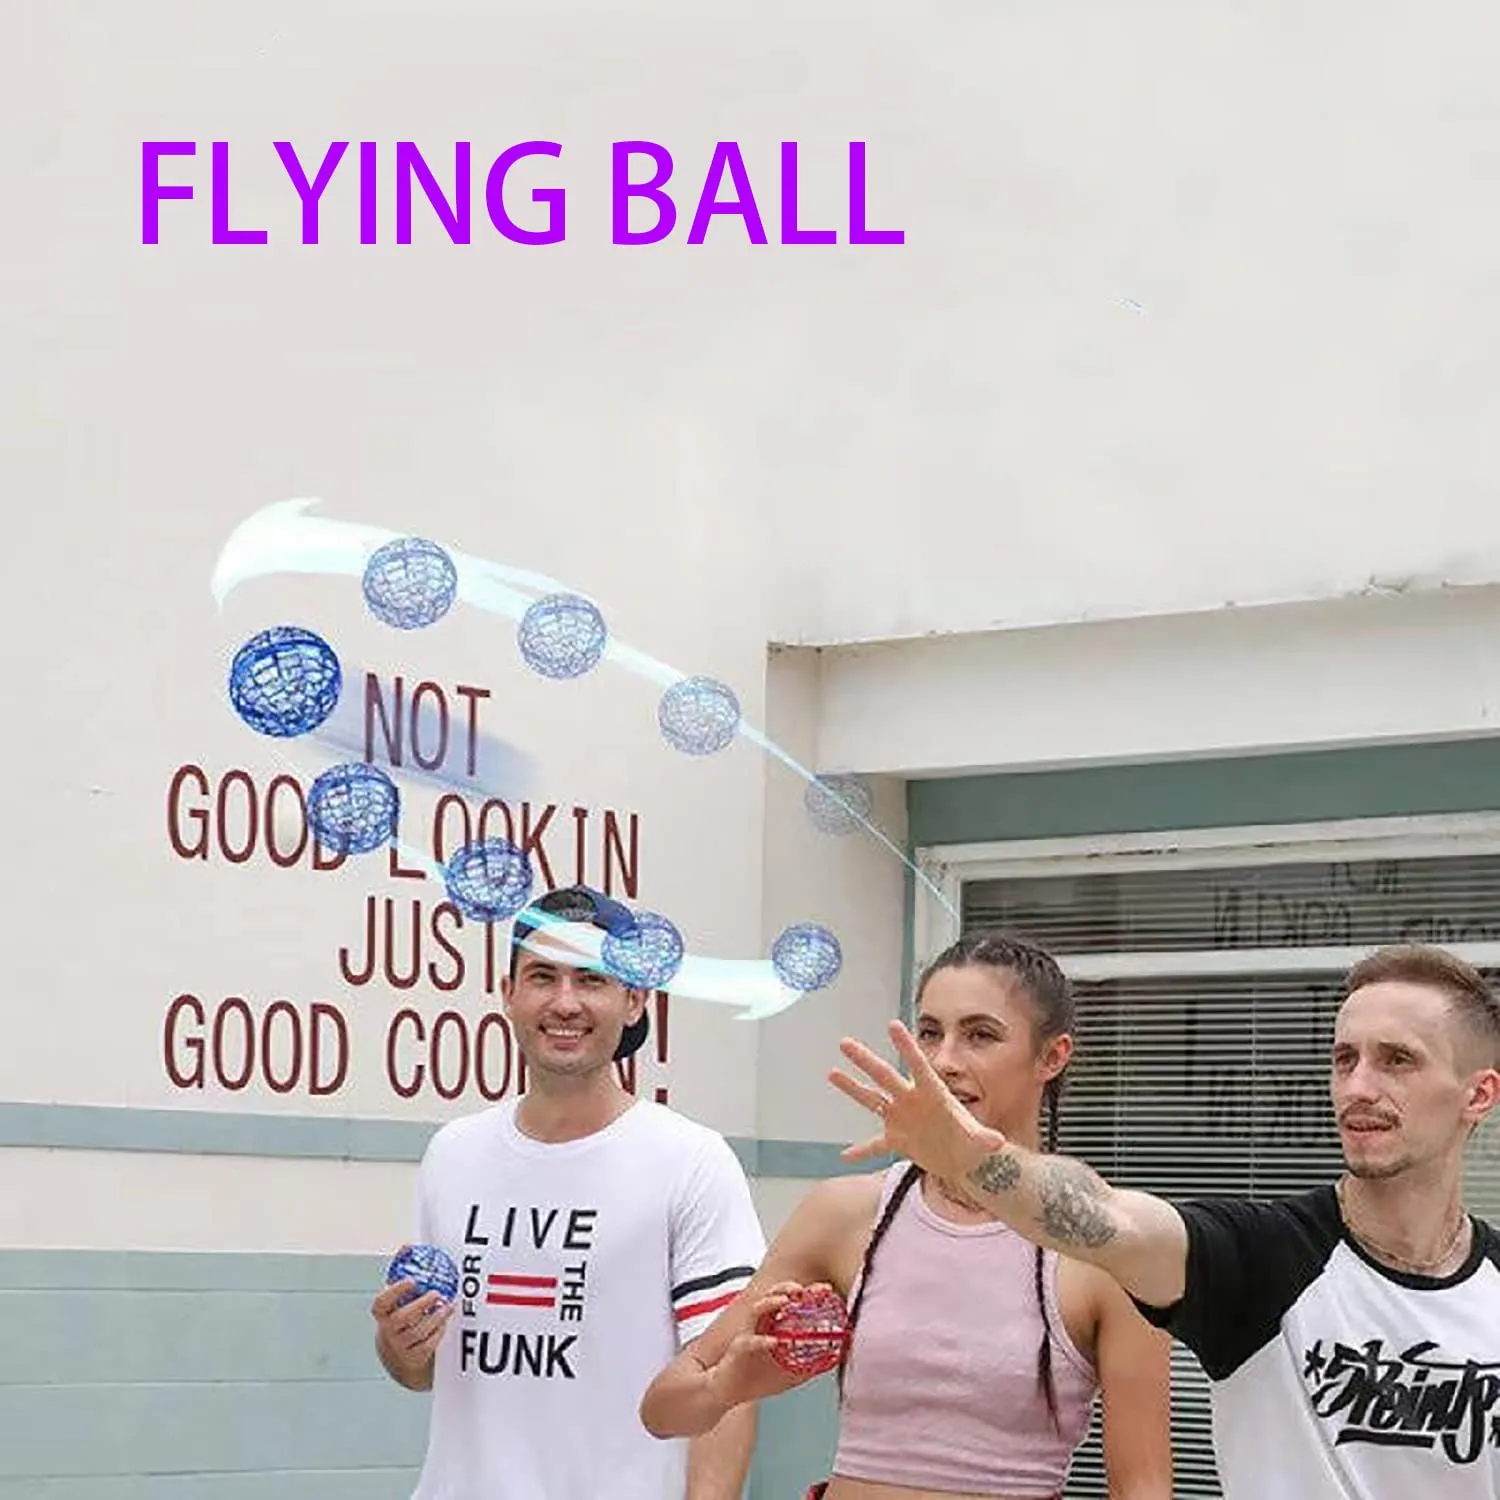 flying ball toys globe shape mini drone flying orb ball rgb lights spinner 360ﾰ rotating hover ball cool toy for kids adult magic flying toys outdoor indoor purple 